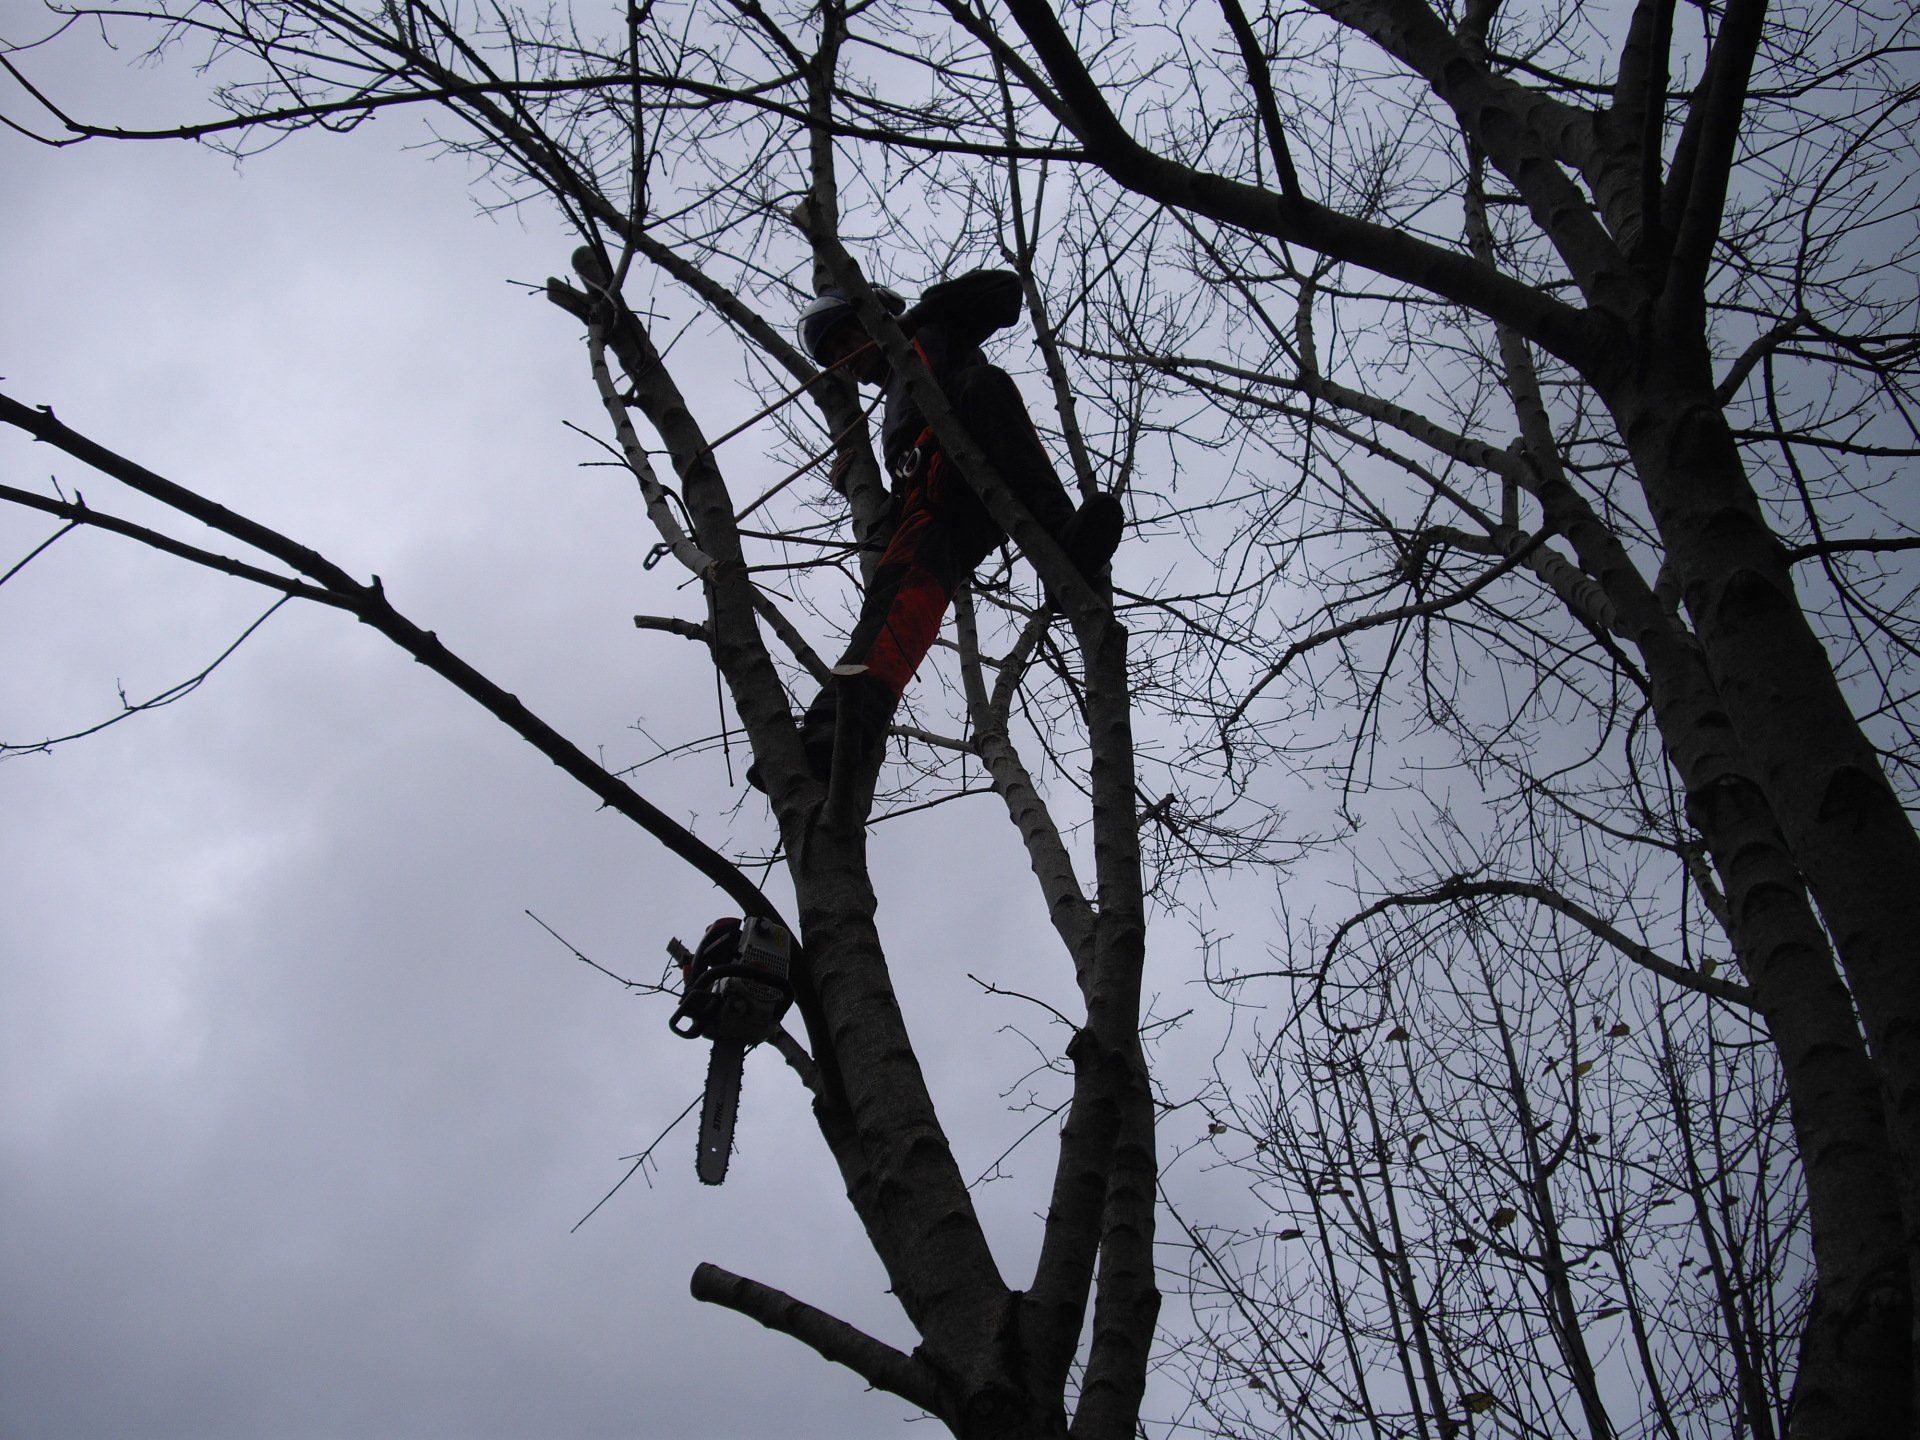 Tree Surgeon with a chain saw